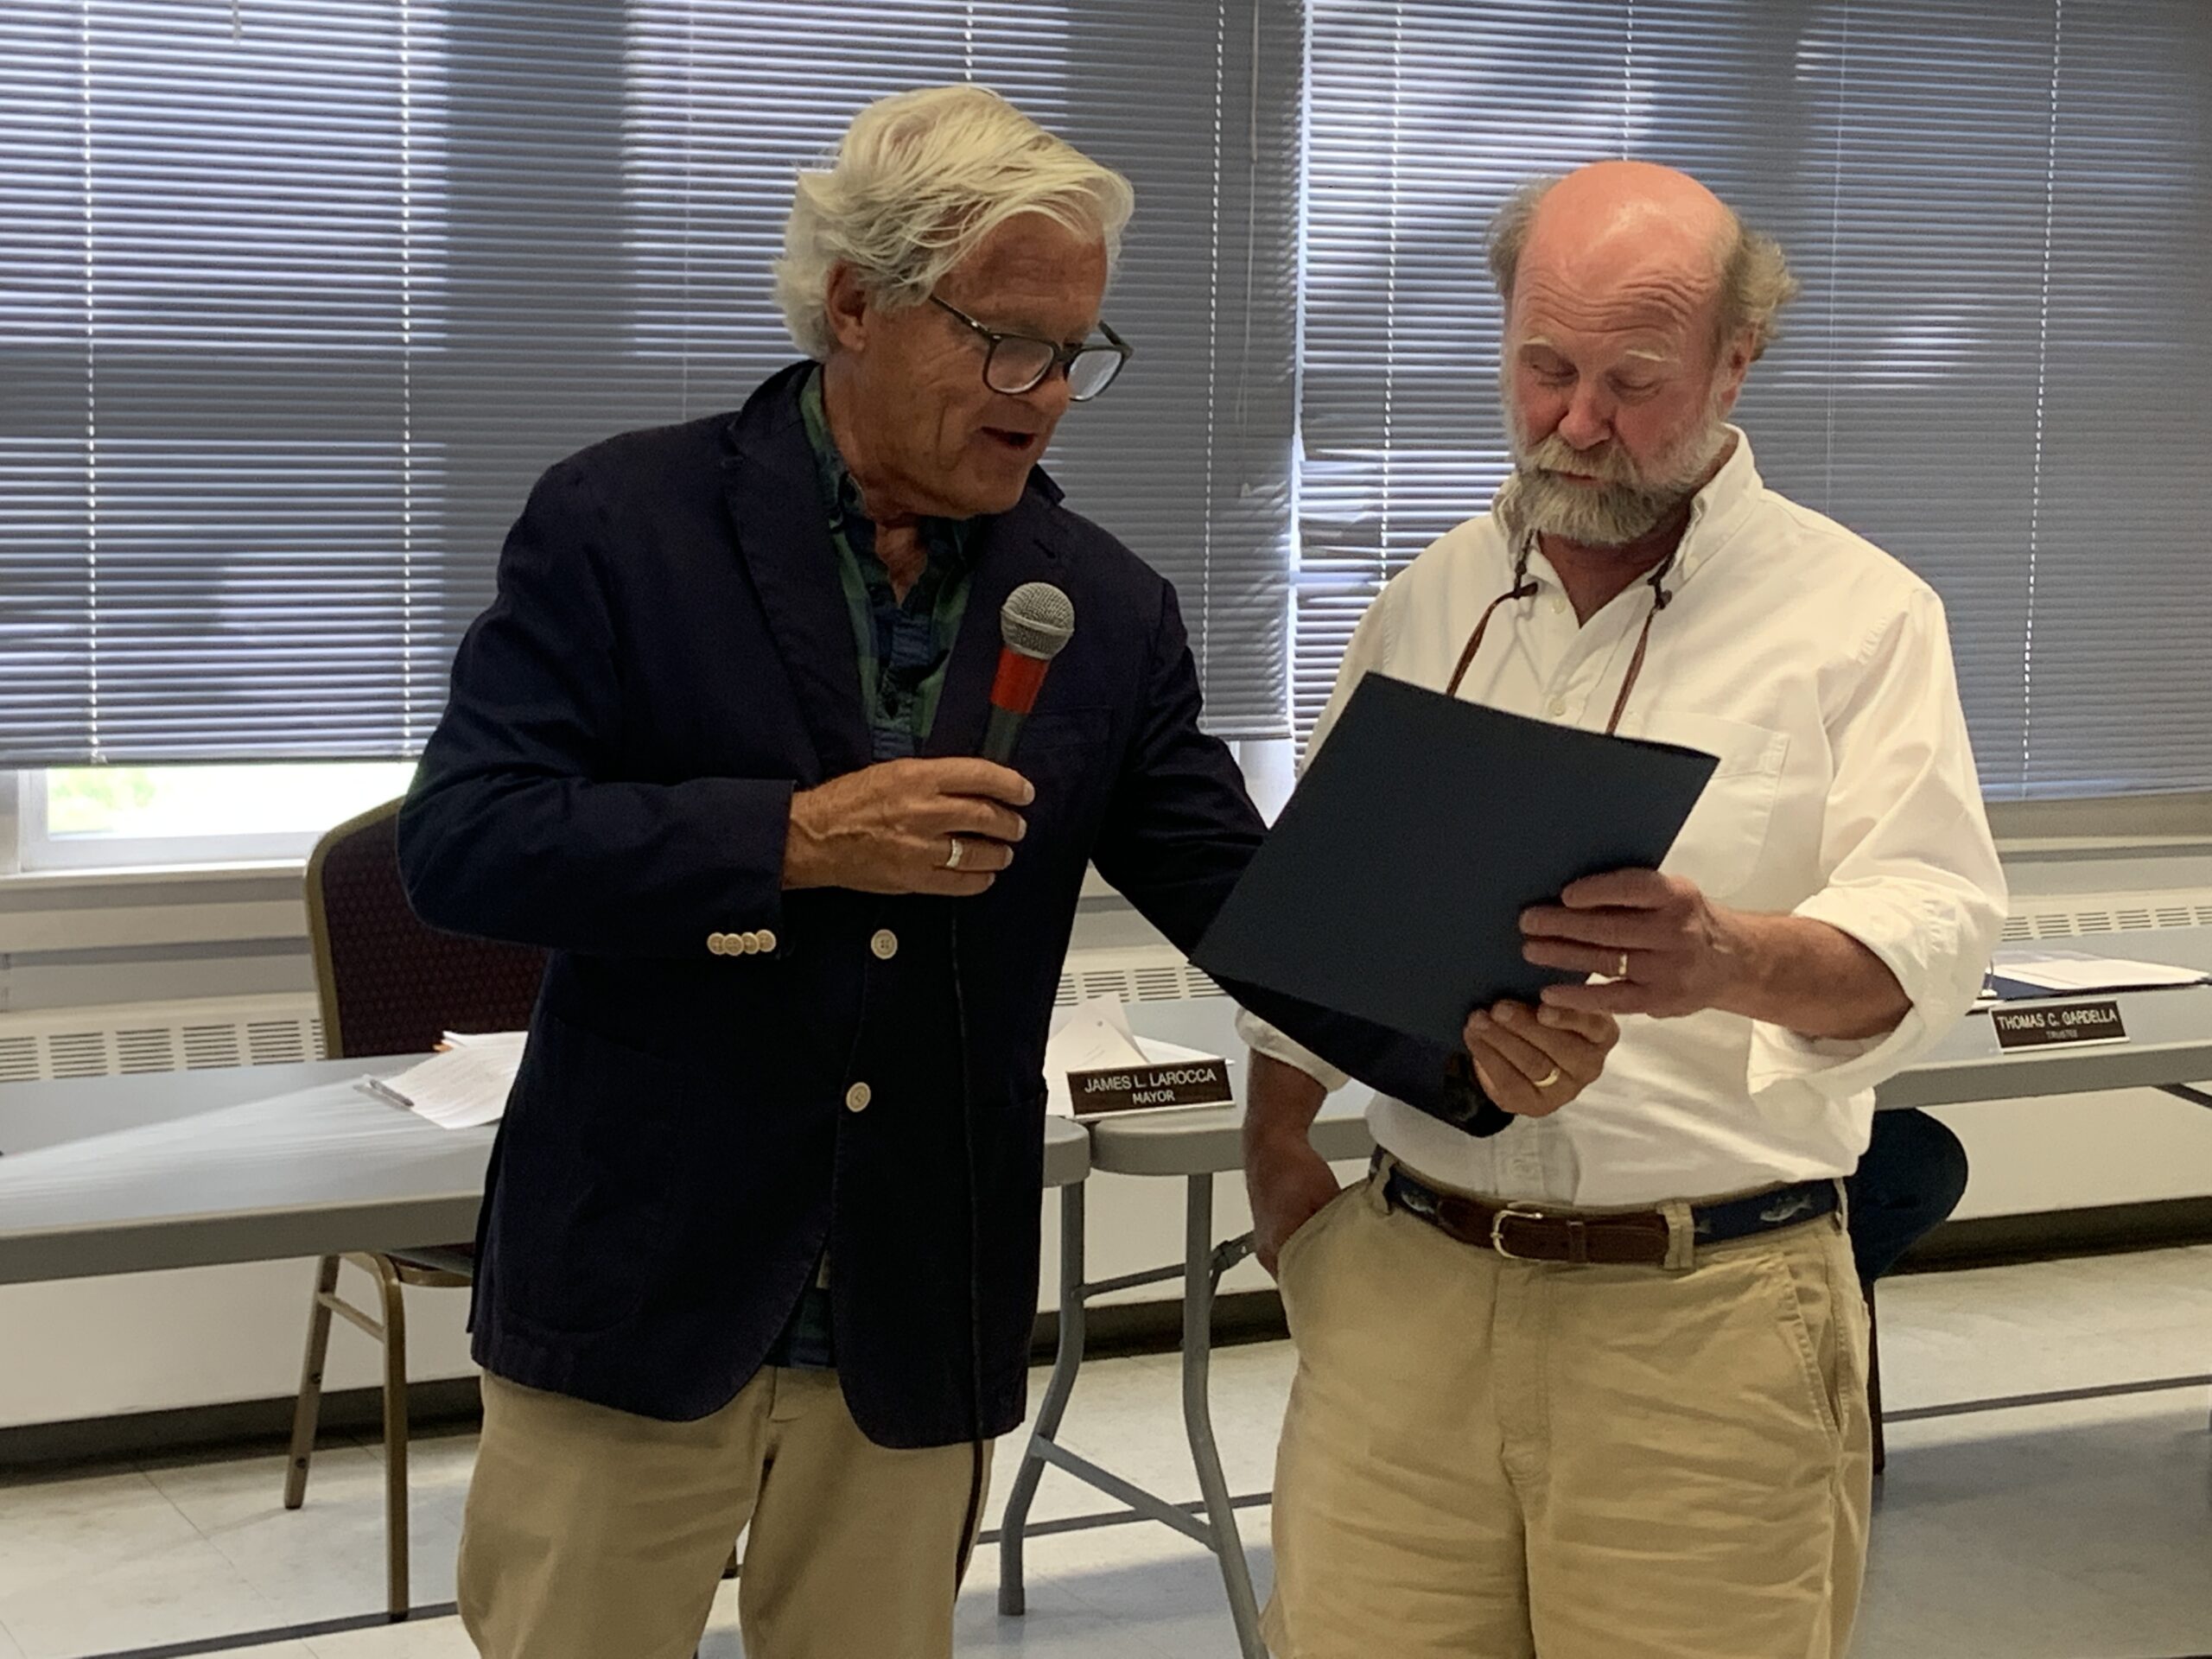 Bryan Boyhan, the former publisher of The Sag Harbor Express, was presented with a proclamation by Sag Harbor Mayor Jim Larocca on Tuesday in recognition of Boyhan's recent induction into the Press Club of Long Island's Hall of Fame. STEPHEN J. KOTZ